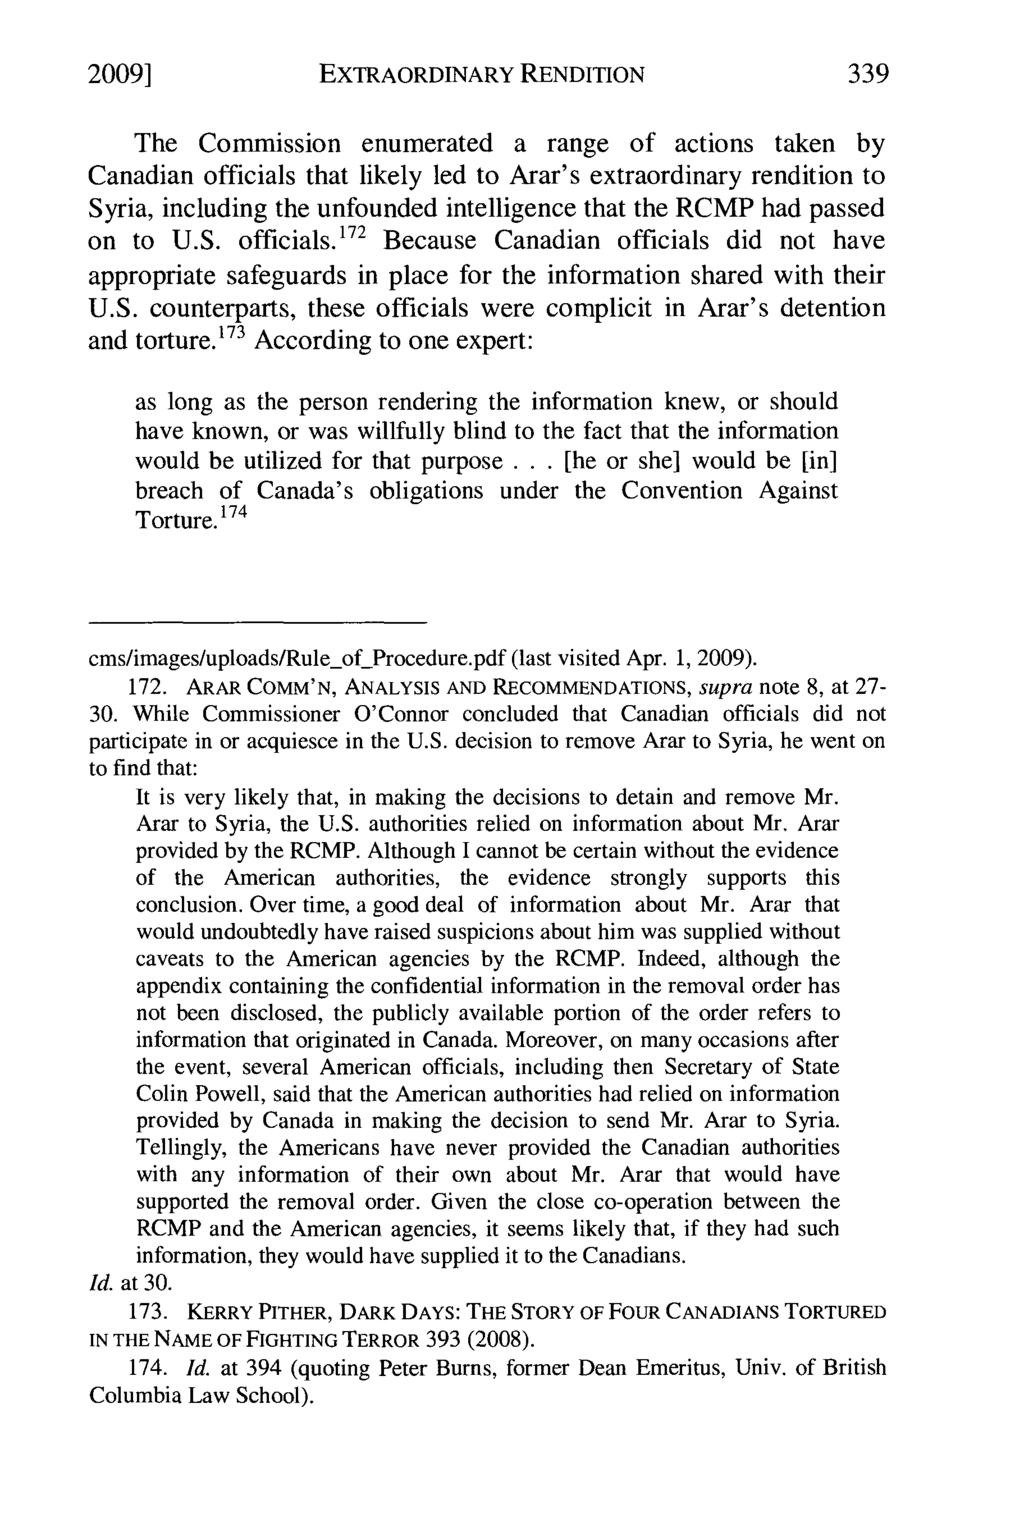 2009] Silva: Extraordinary Rendition: A Challenge to Canadian and United State EXTRAORDINARY RENDITION The Commission enumerated a range of actions taken by Canadian officials that likely led to